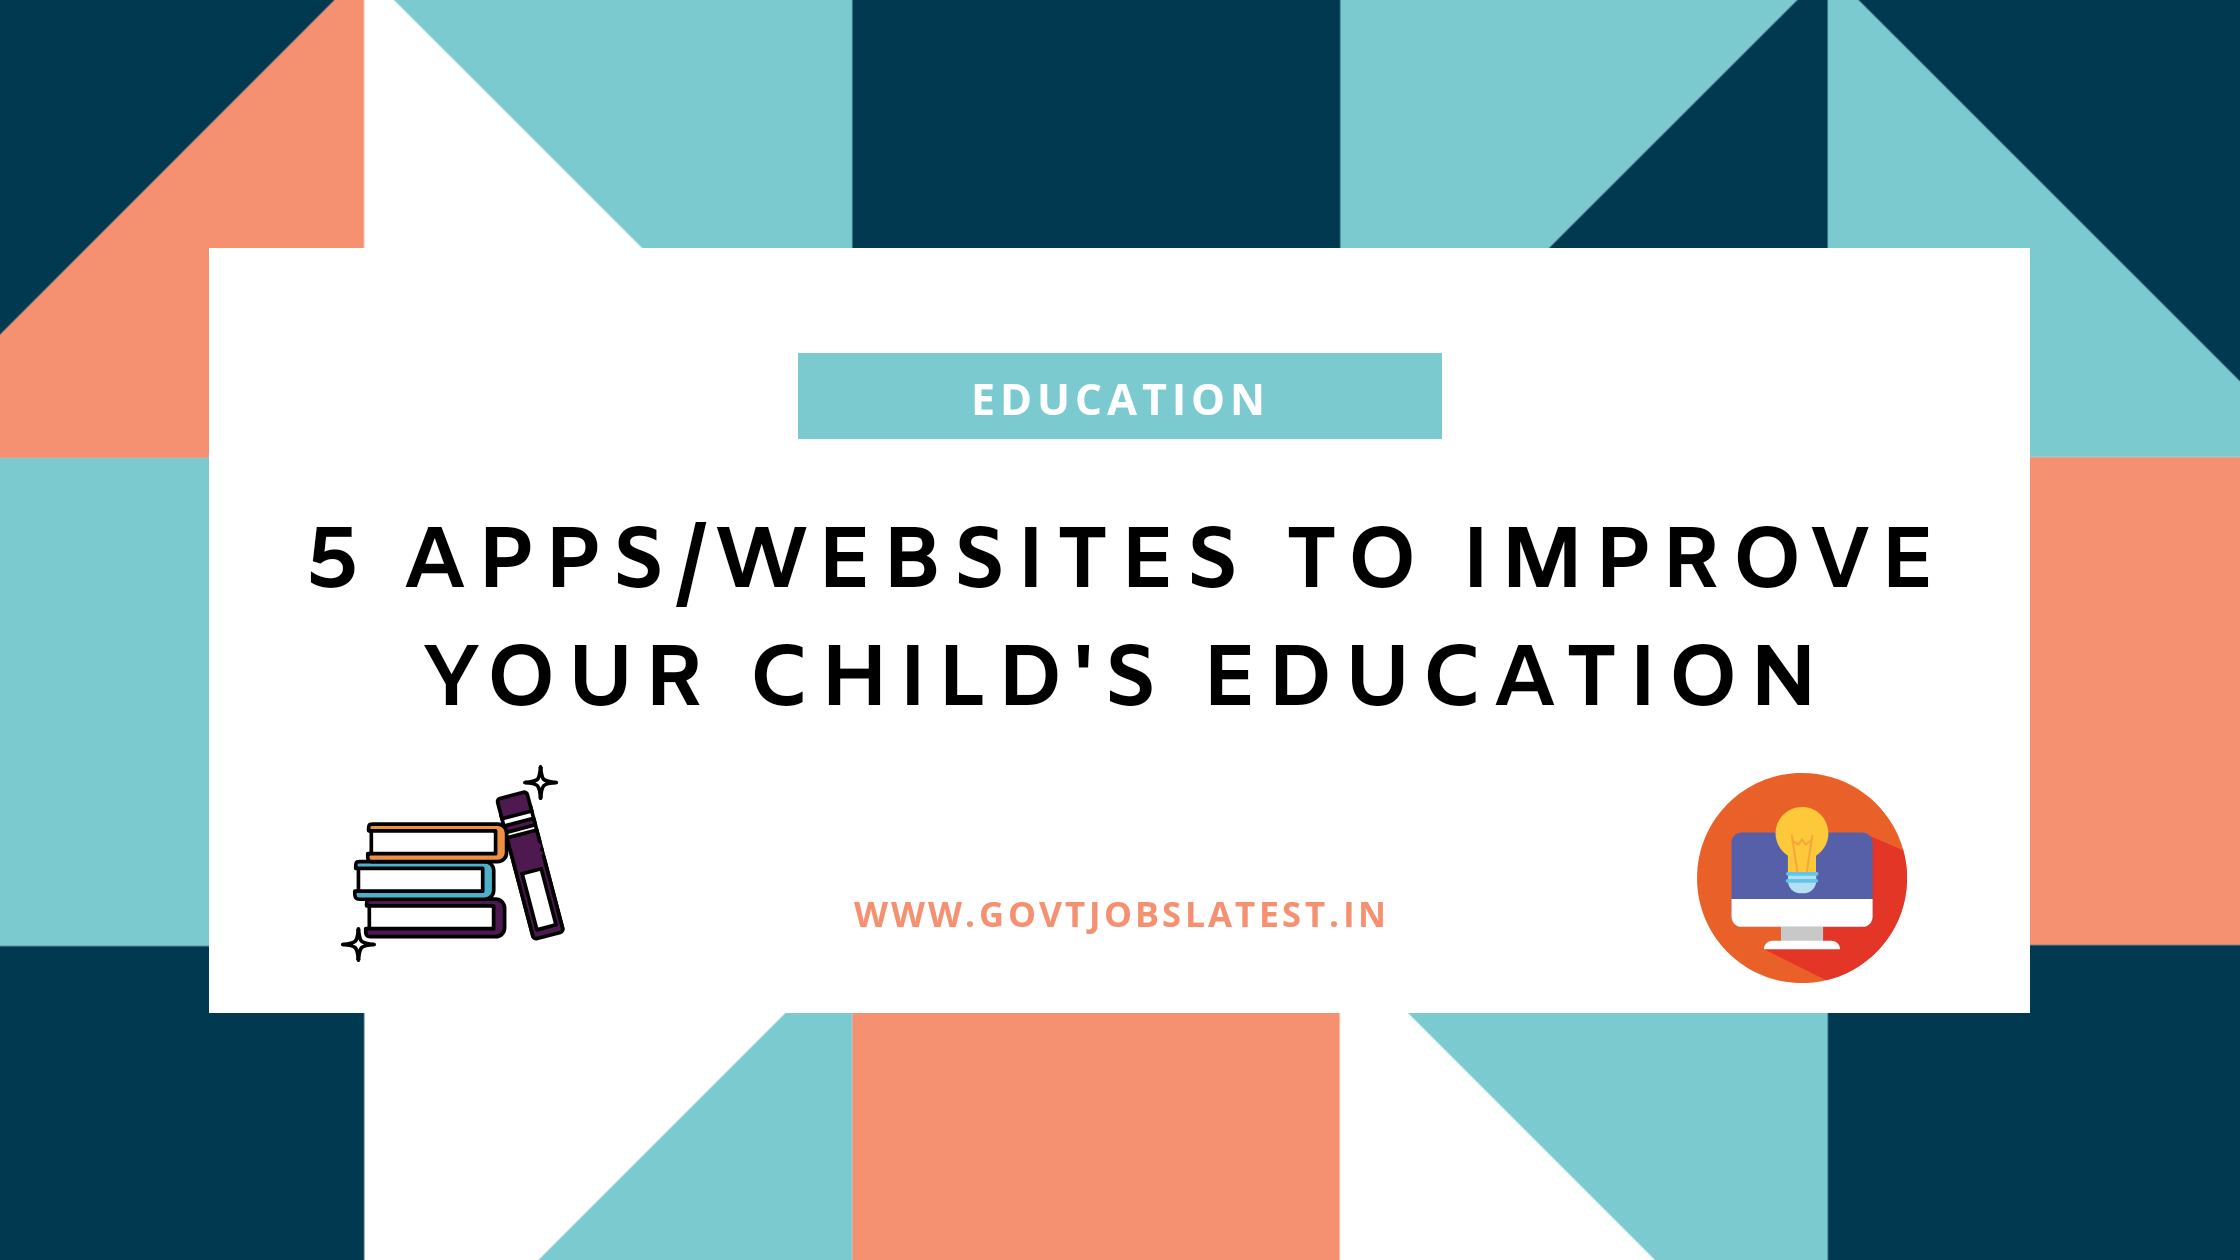 5 apps/websites to improve your child’s education